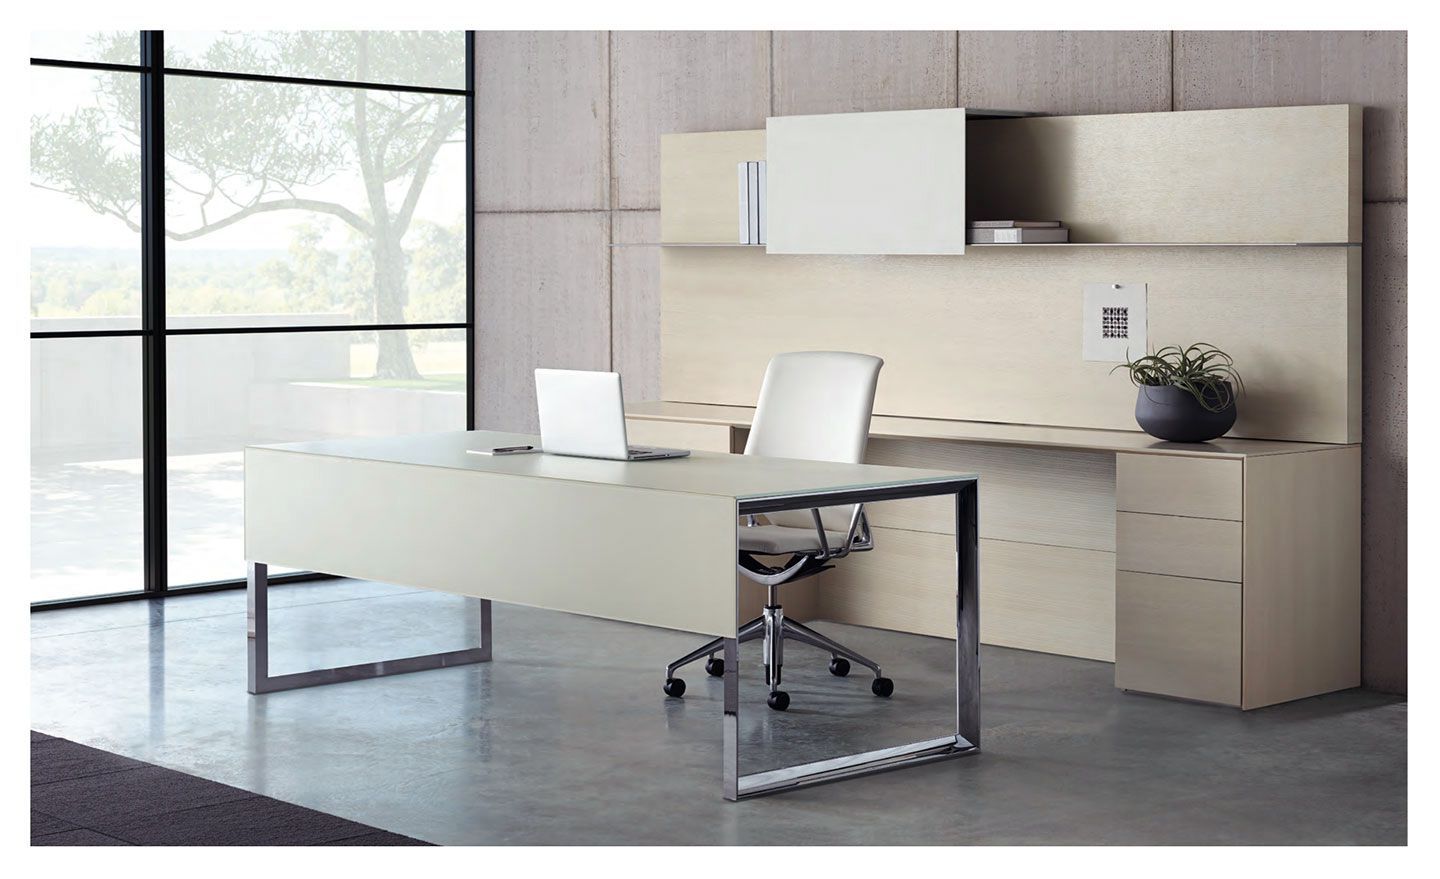 2018 Immaculate White Glass Desk With Chrome Open Panel And Matching Storage Pertaining To White Finish Glass Top Desks (View 2 of 15)